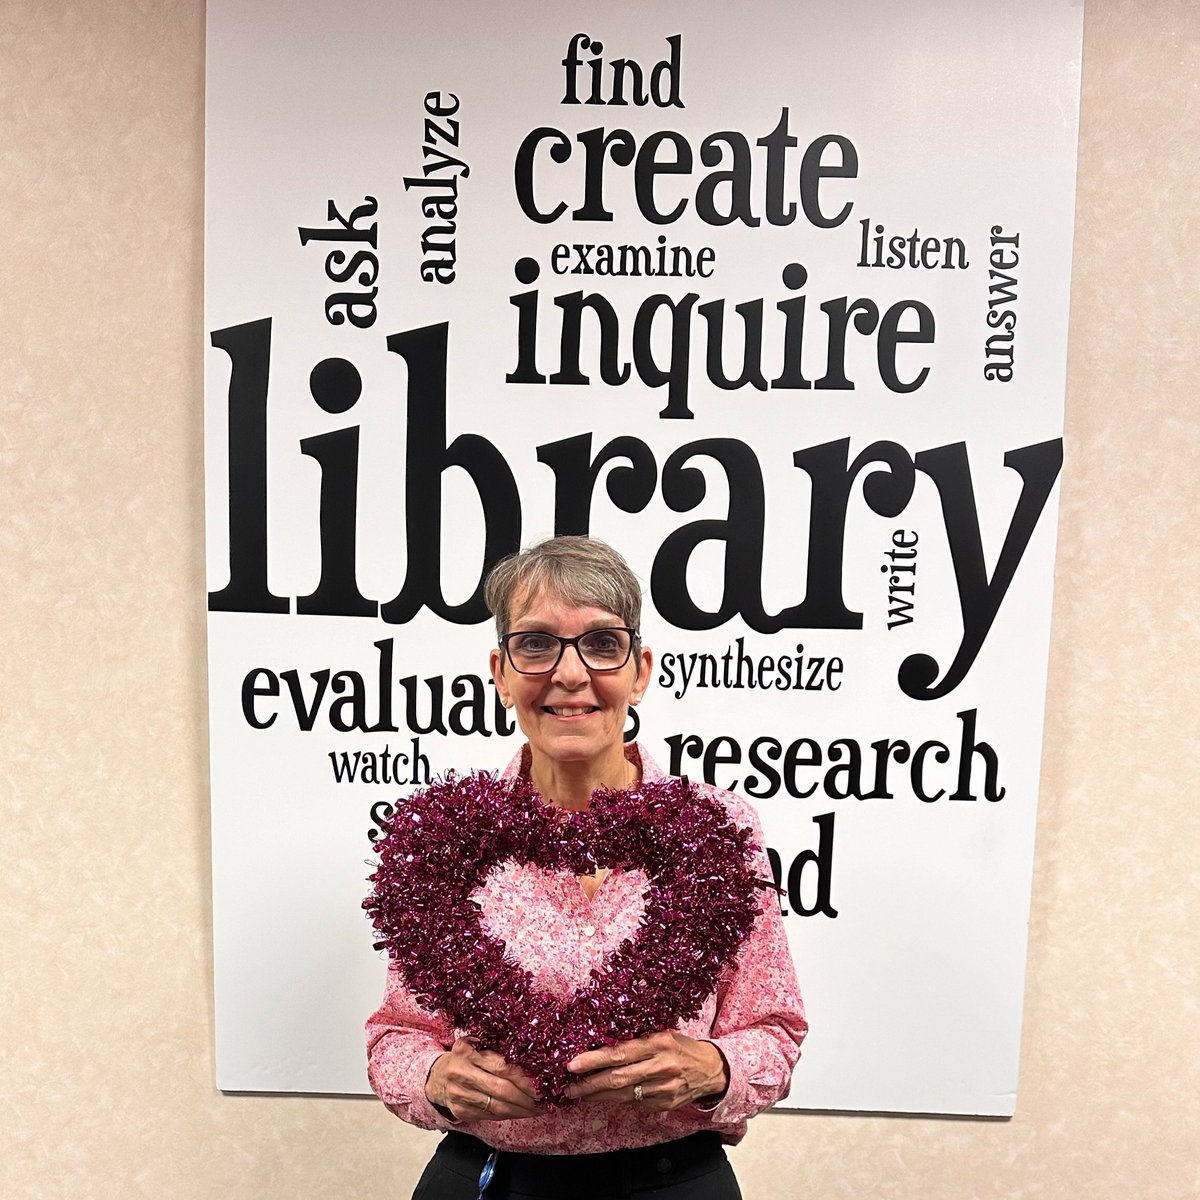 As #NationalLibraryWeek comes to an end, we are thrilled to feature Nancy Speisser, Assistant Vice Chancellor of University Libraries, based out of #SouthUniversity, VABeach.

Speical appreciation and thanks this #LibraryWeek, and always to Nancy and our entire SU Library team!